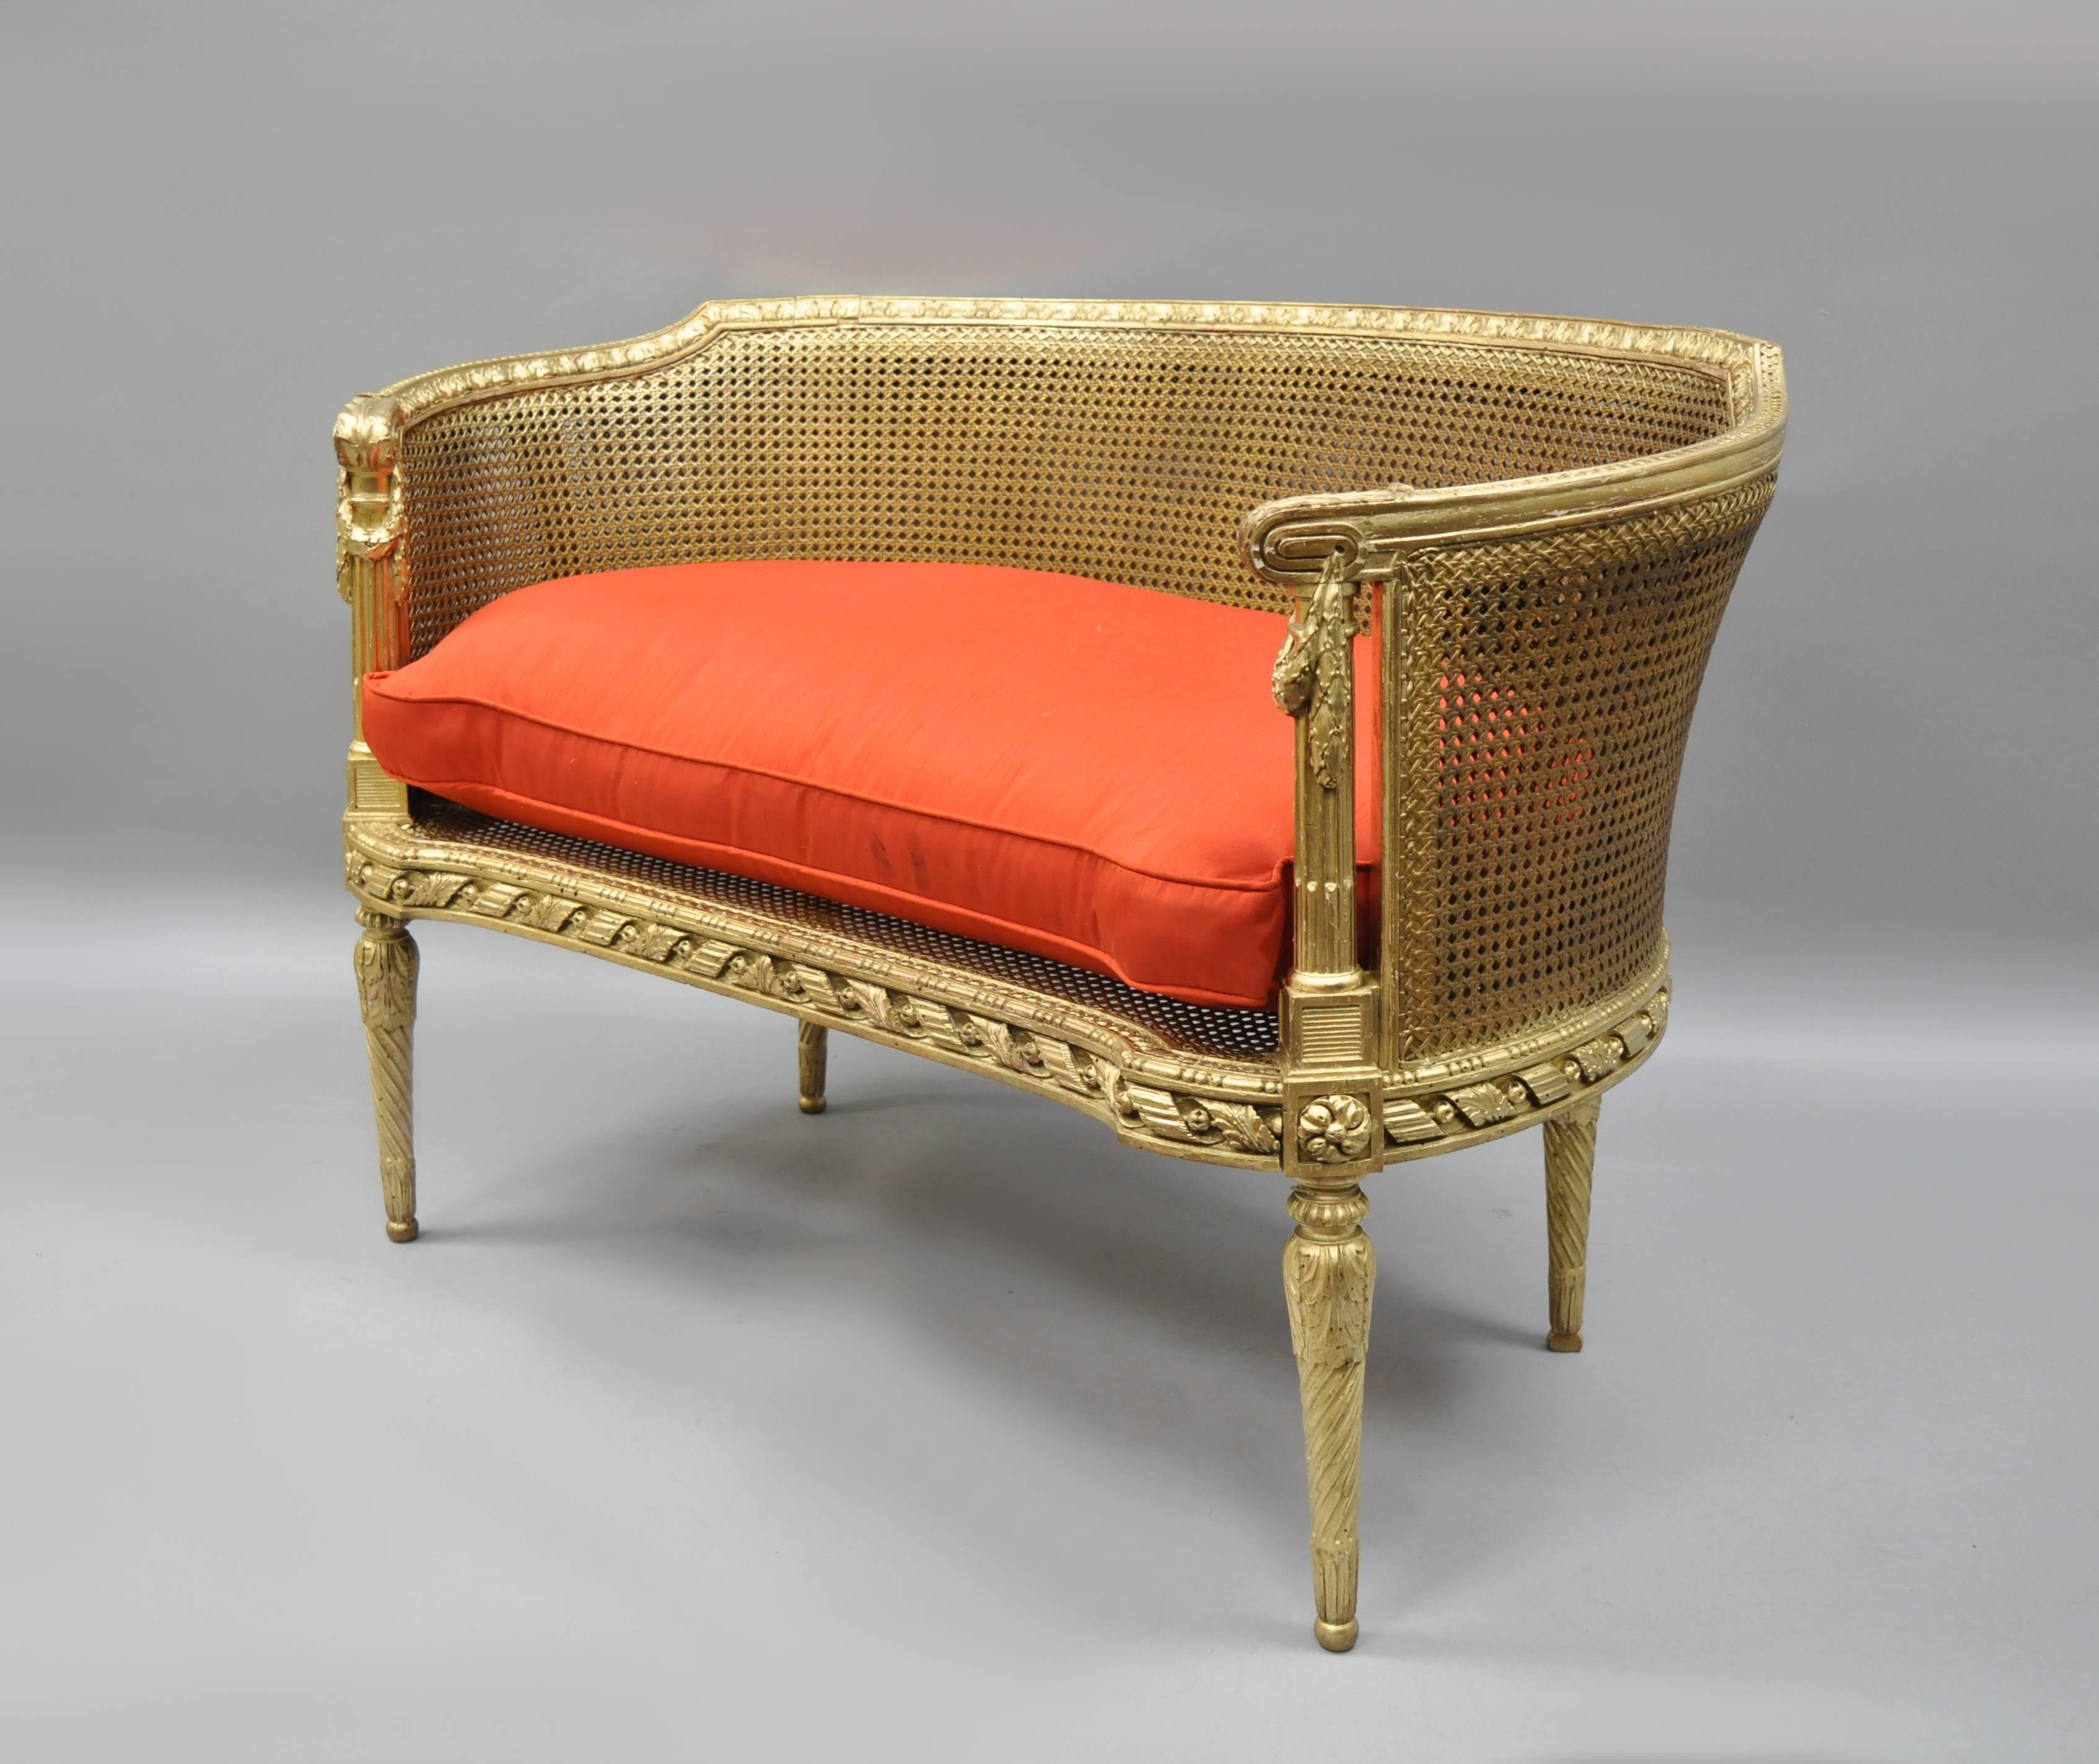 Antique French Louis XVI style gold giltwood parlor settee. Item features a rounded frame, cane back and seat, loose cushion, tapered legs, draped foliage at the arms, finely carved details, and very attractive form. Current finish appears to be a